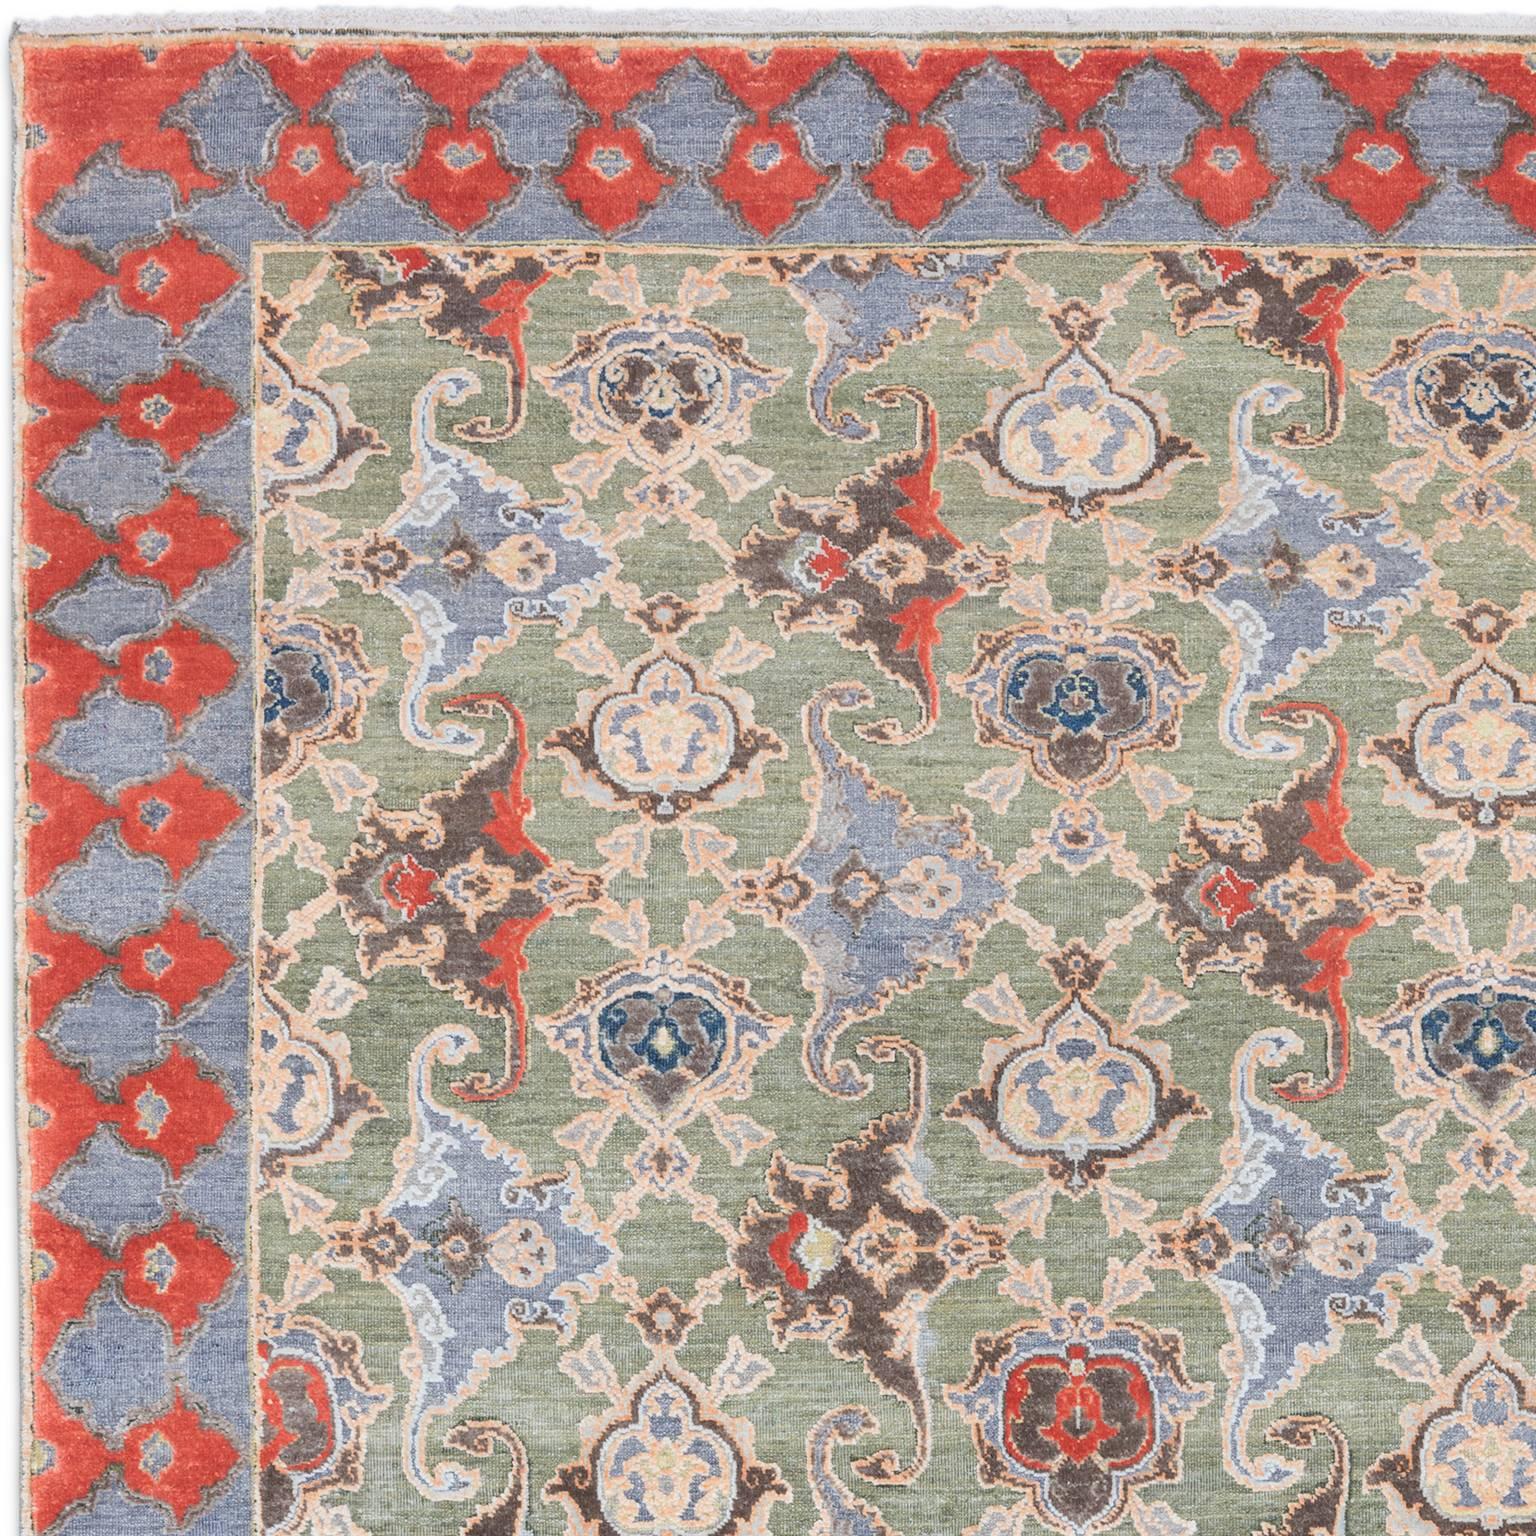 Knots Rugs presents the new 17th Century Modern Polonaise No. 05. Produced in Jaipur in 11/11 Persian knot quality from oxidized wool and silk.
This piece is number 1/10 of this special Limited Edition collection produced by Knots Rugs. The